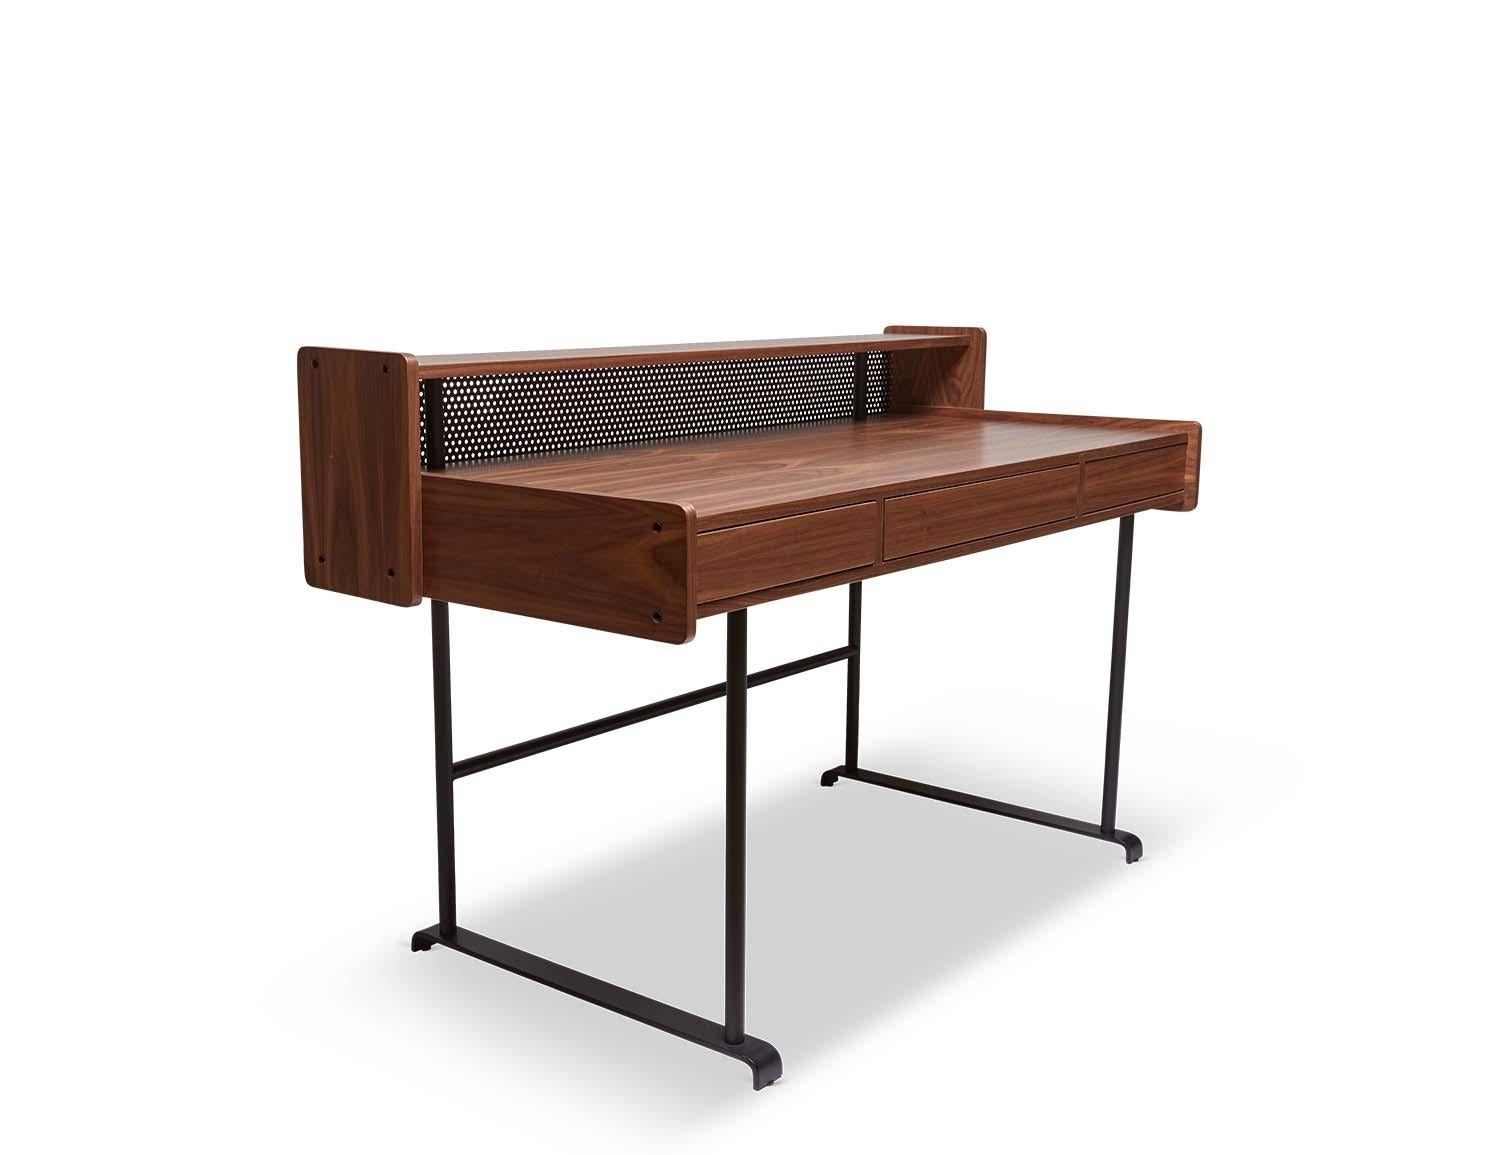 The Maker's desk is made of American walnut or white oak and has three push-to-open drawers. The case rests on a matte black powder-coated base, and features perforated steel detail on the back. 

The Lawson-Fenning Collection is designed and